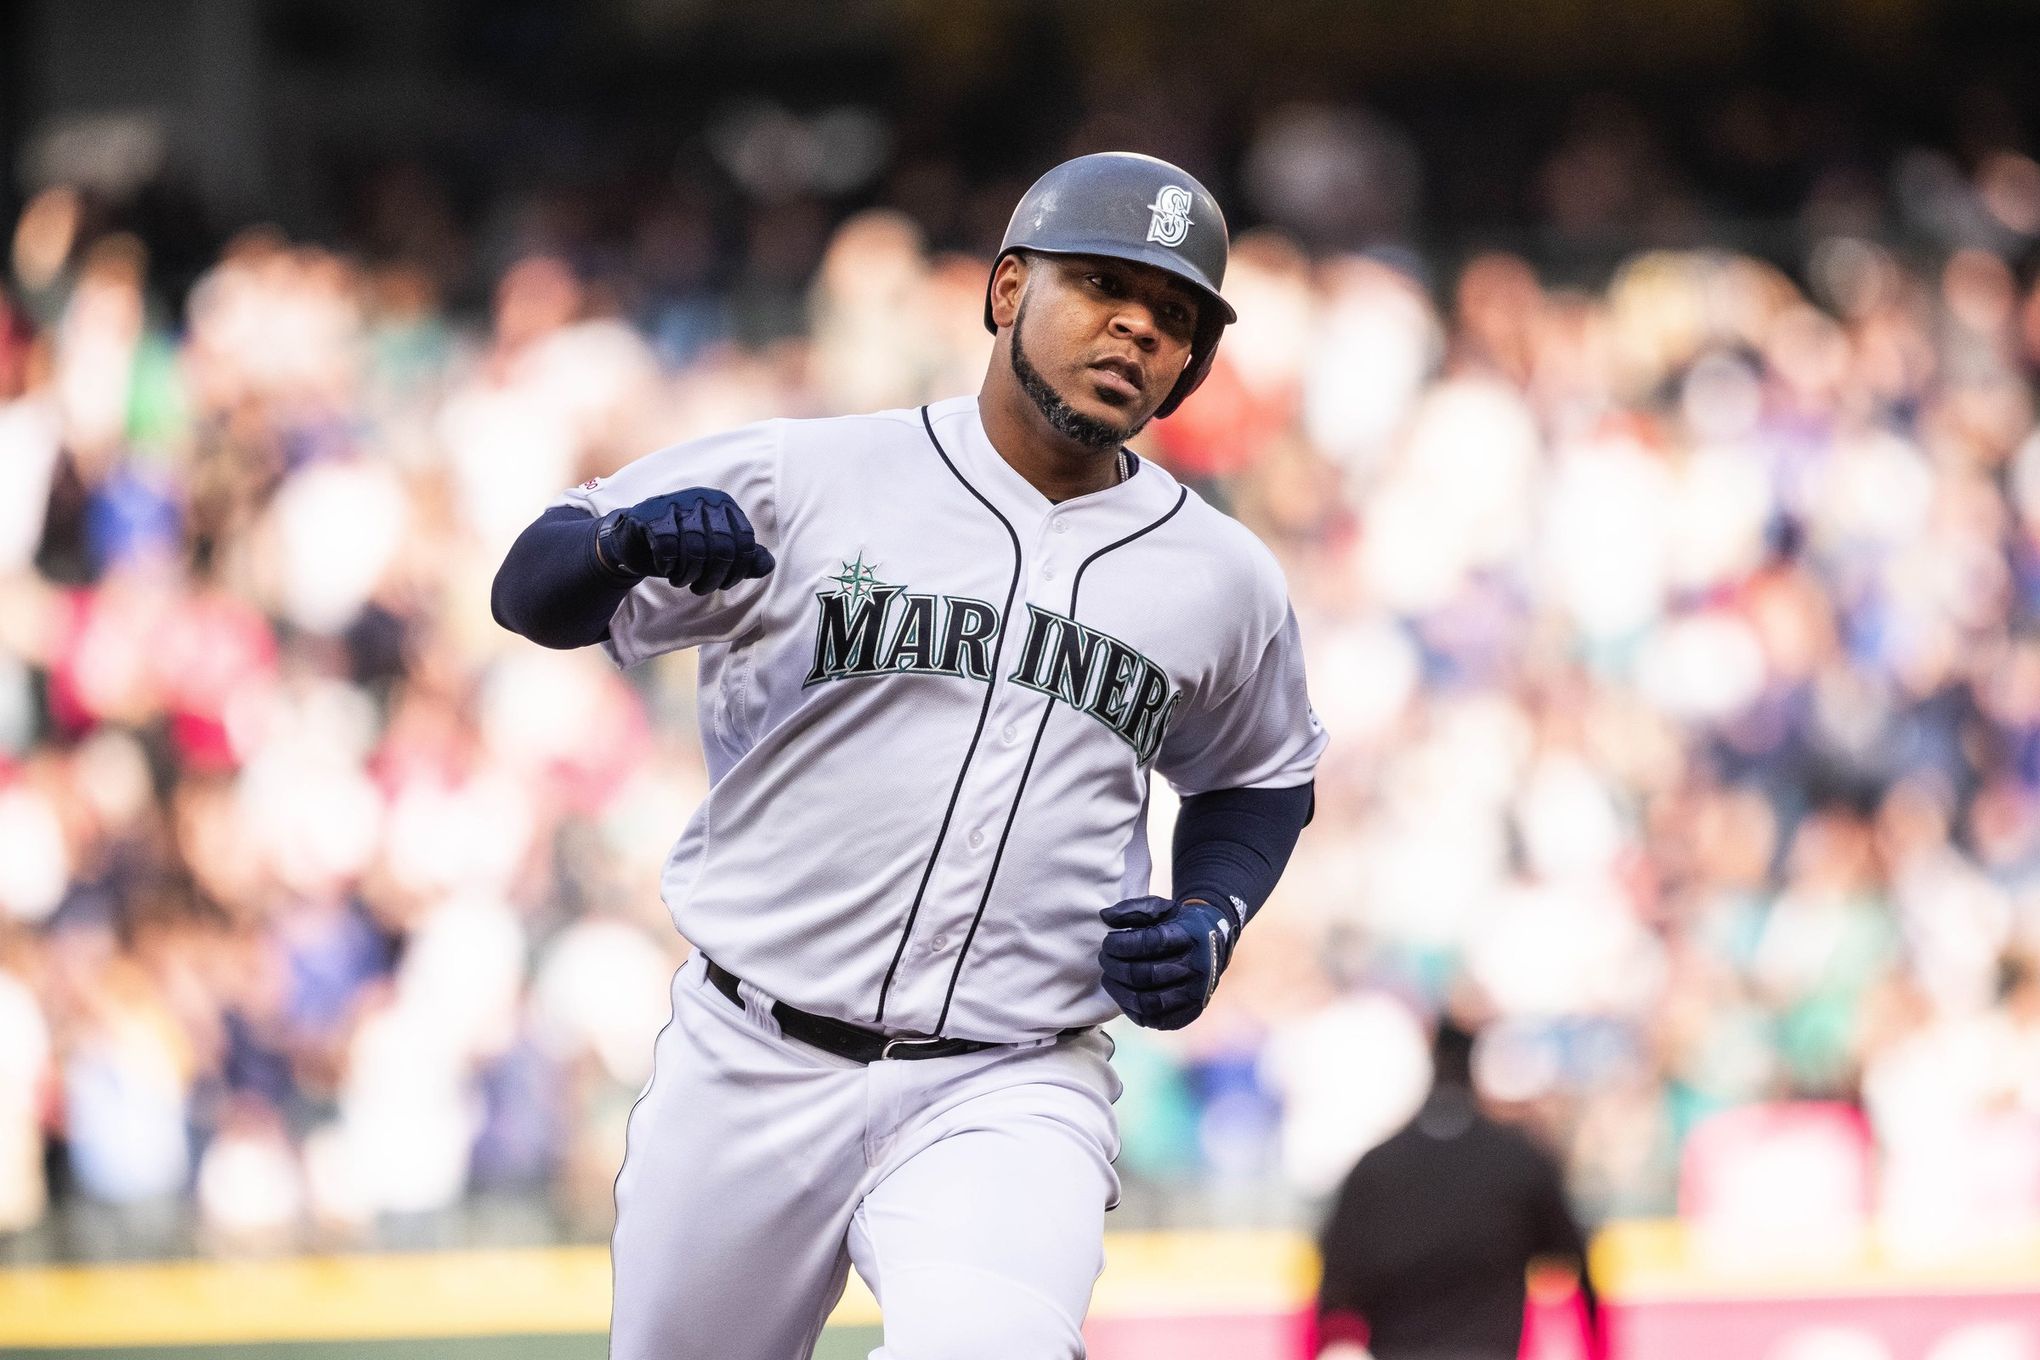 Yankees acquire Edwin Encarnacion from Mariners, per report - MLB Daily Dish